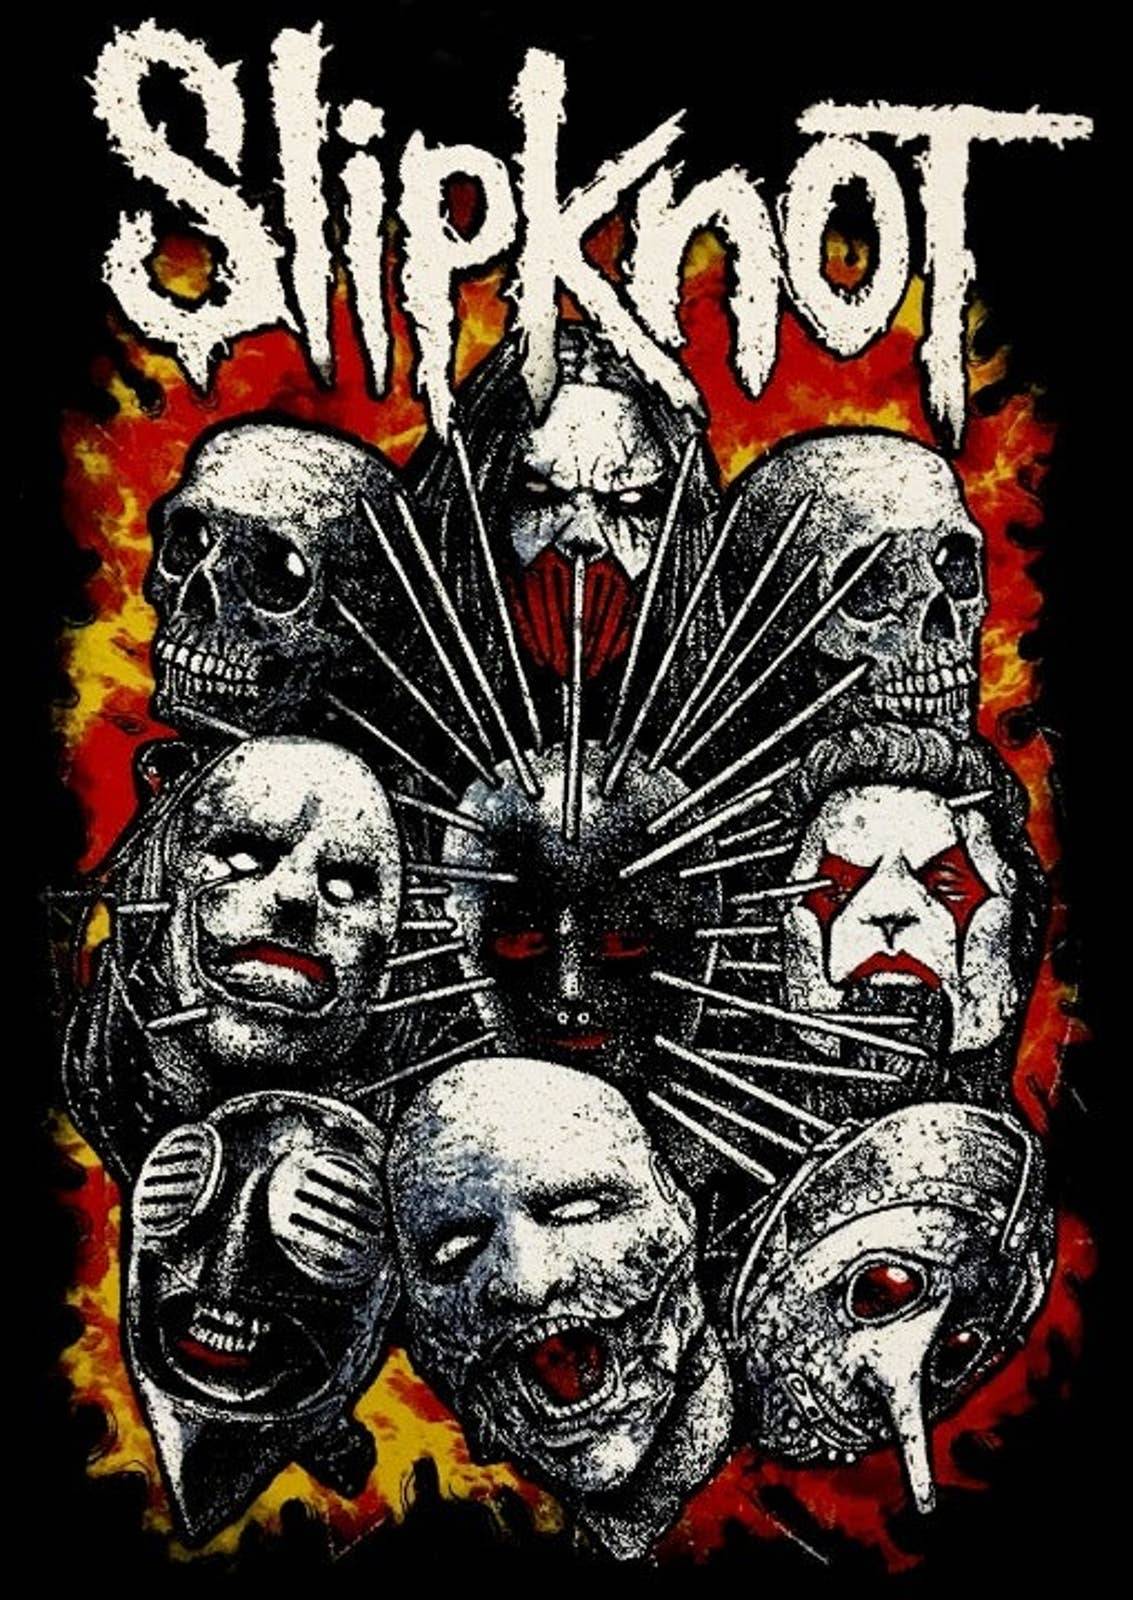 36" x 60" Slipknot Tapestry Wall Hanging Décor